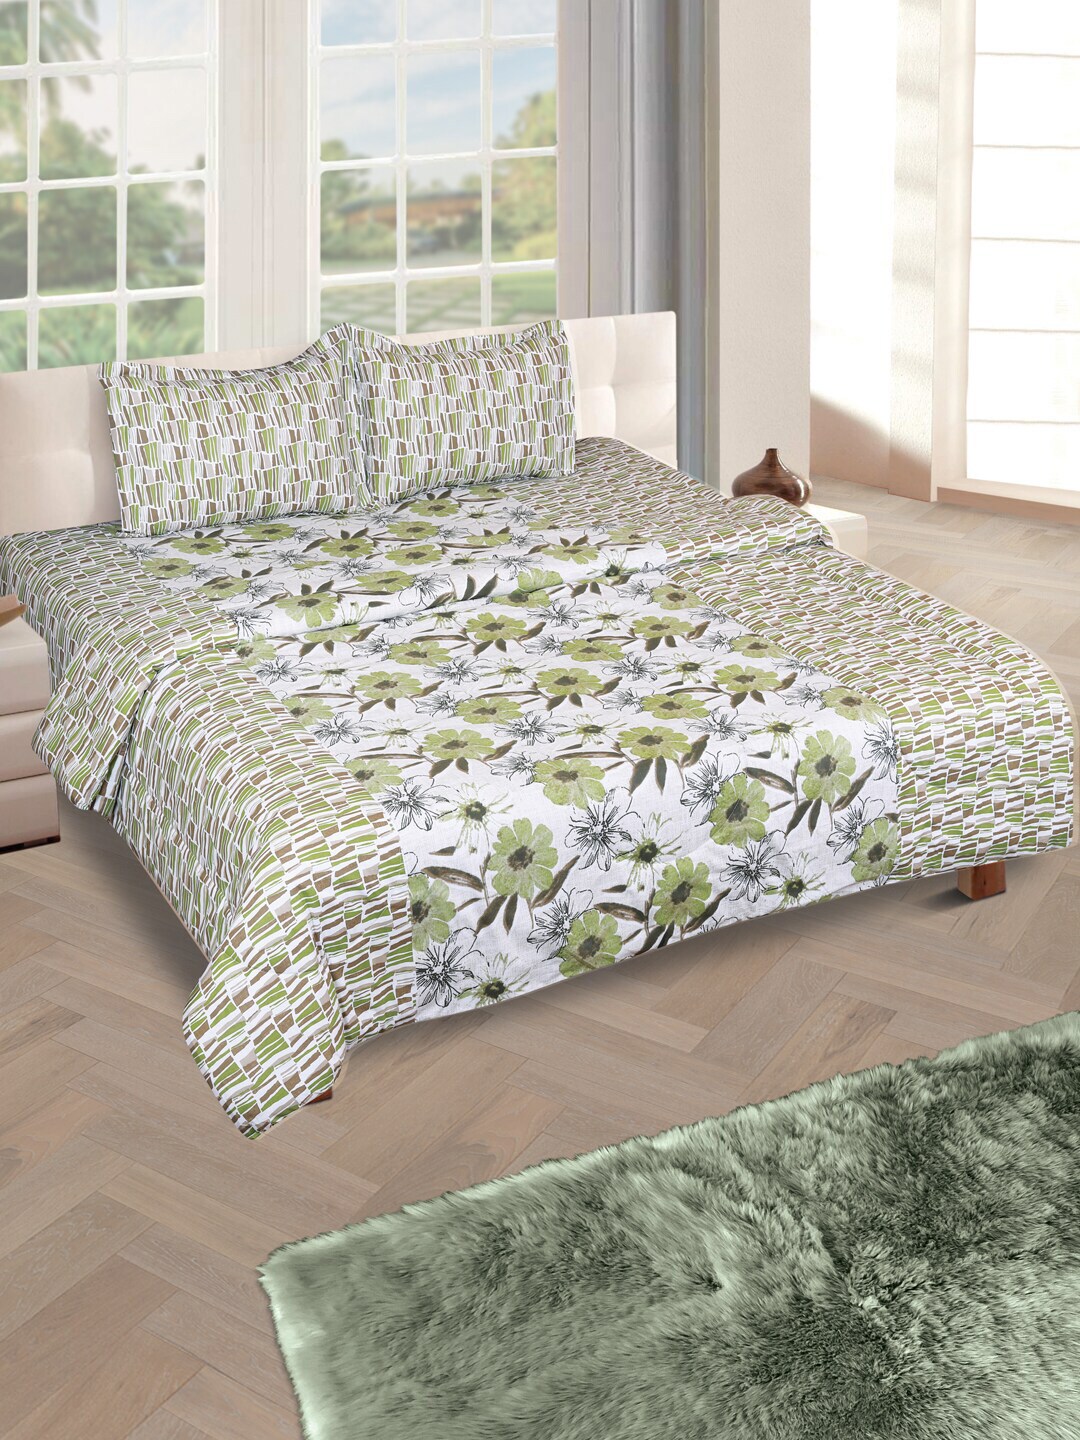 ROMEE Off-White & Green Floral Printed Double King Bedding Set With Reversible Quilt Price in India